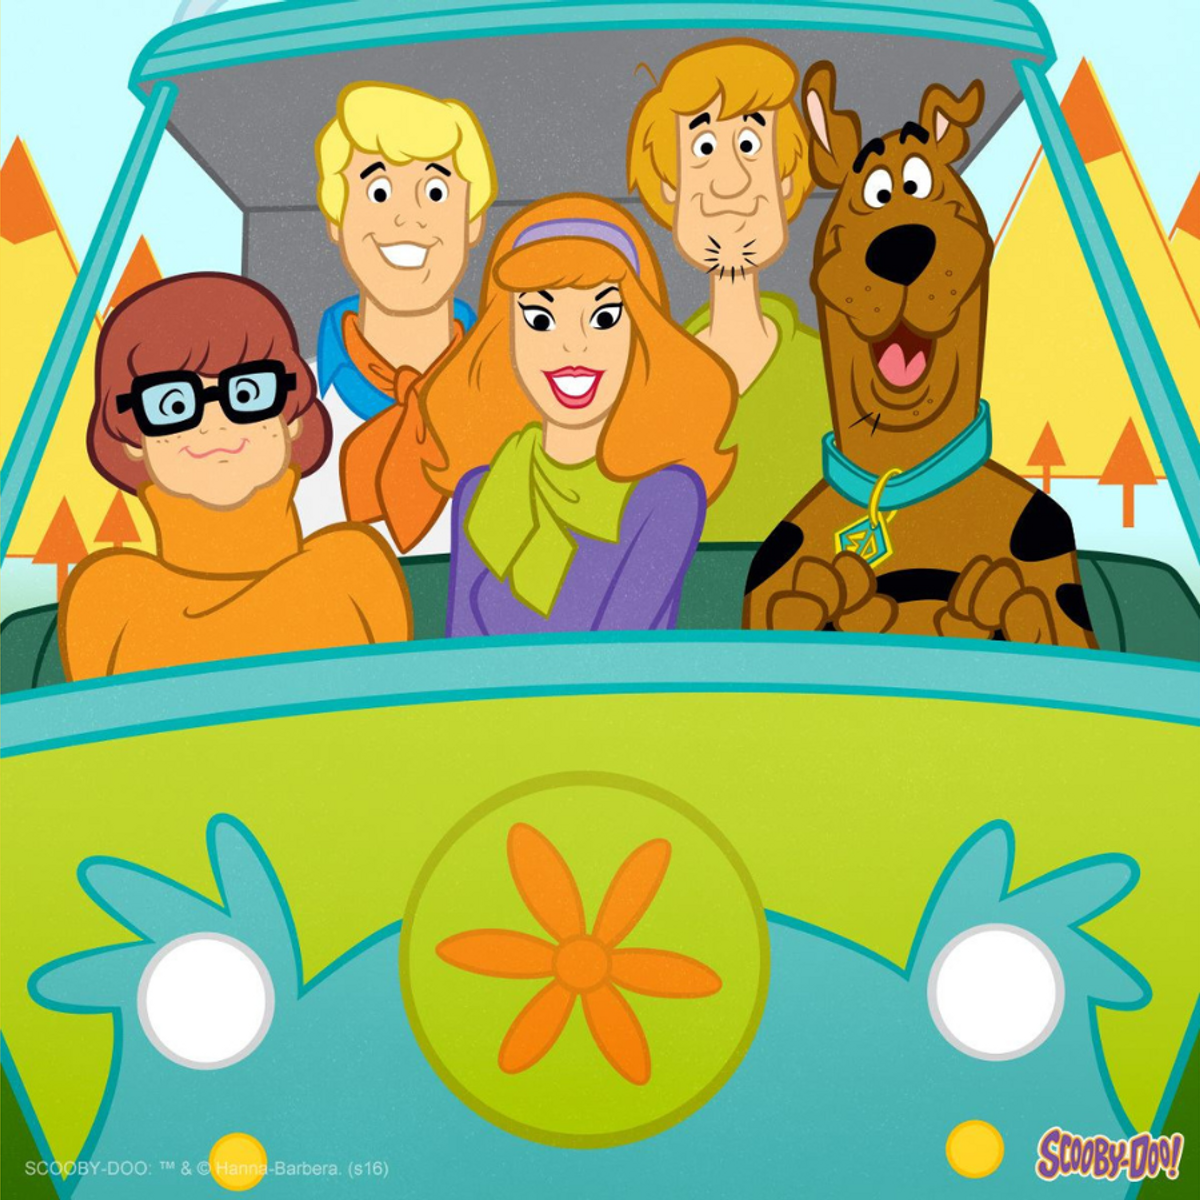 baron crease recommends Scooby Doo Pic